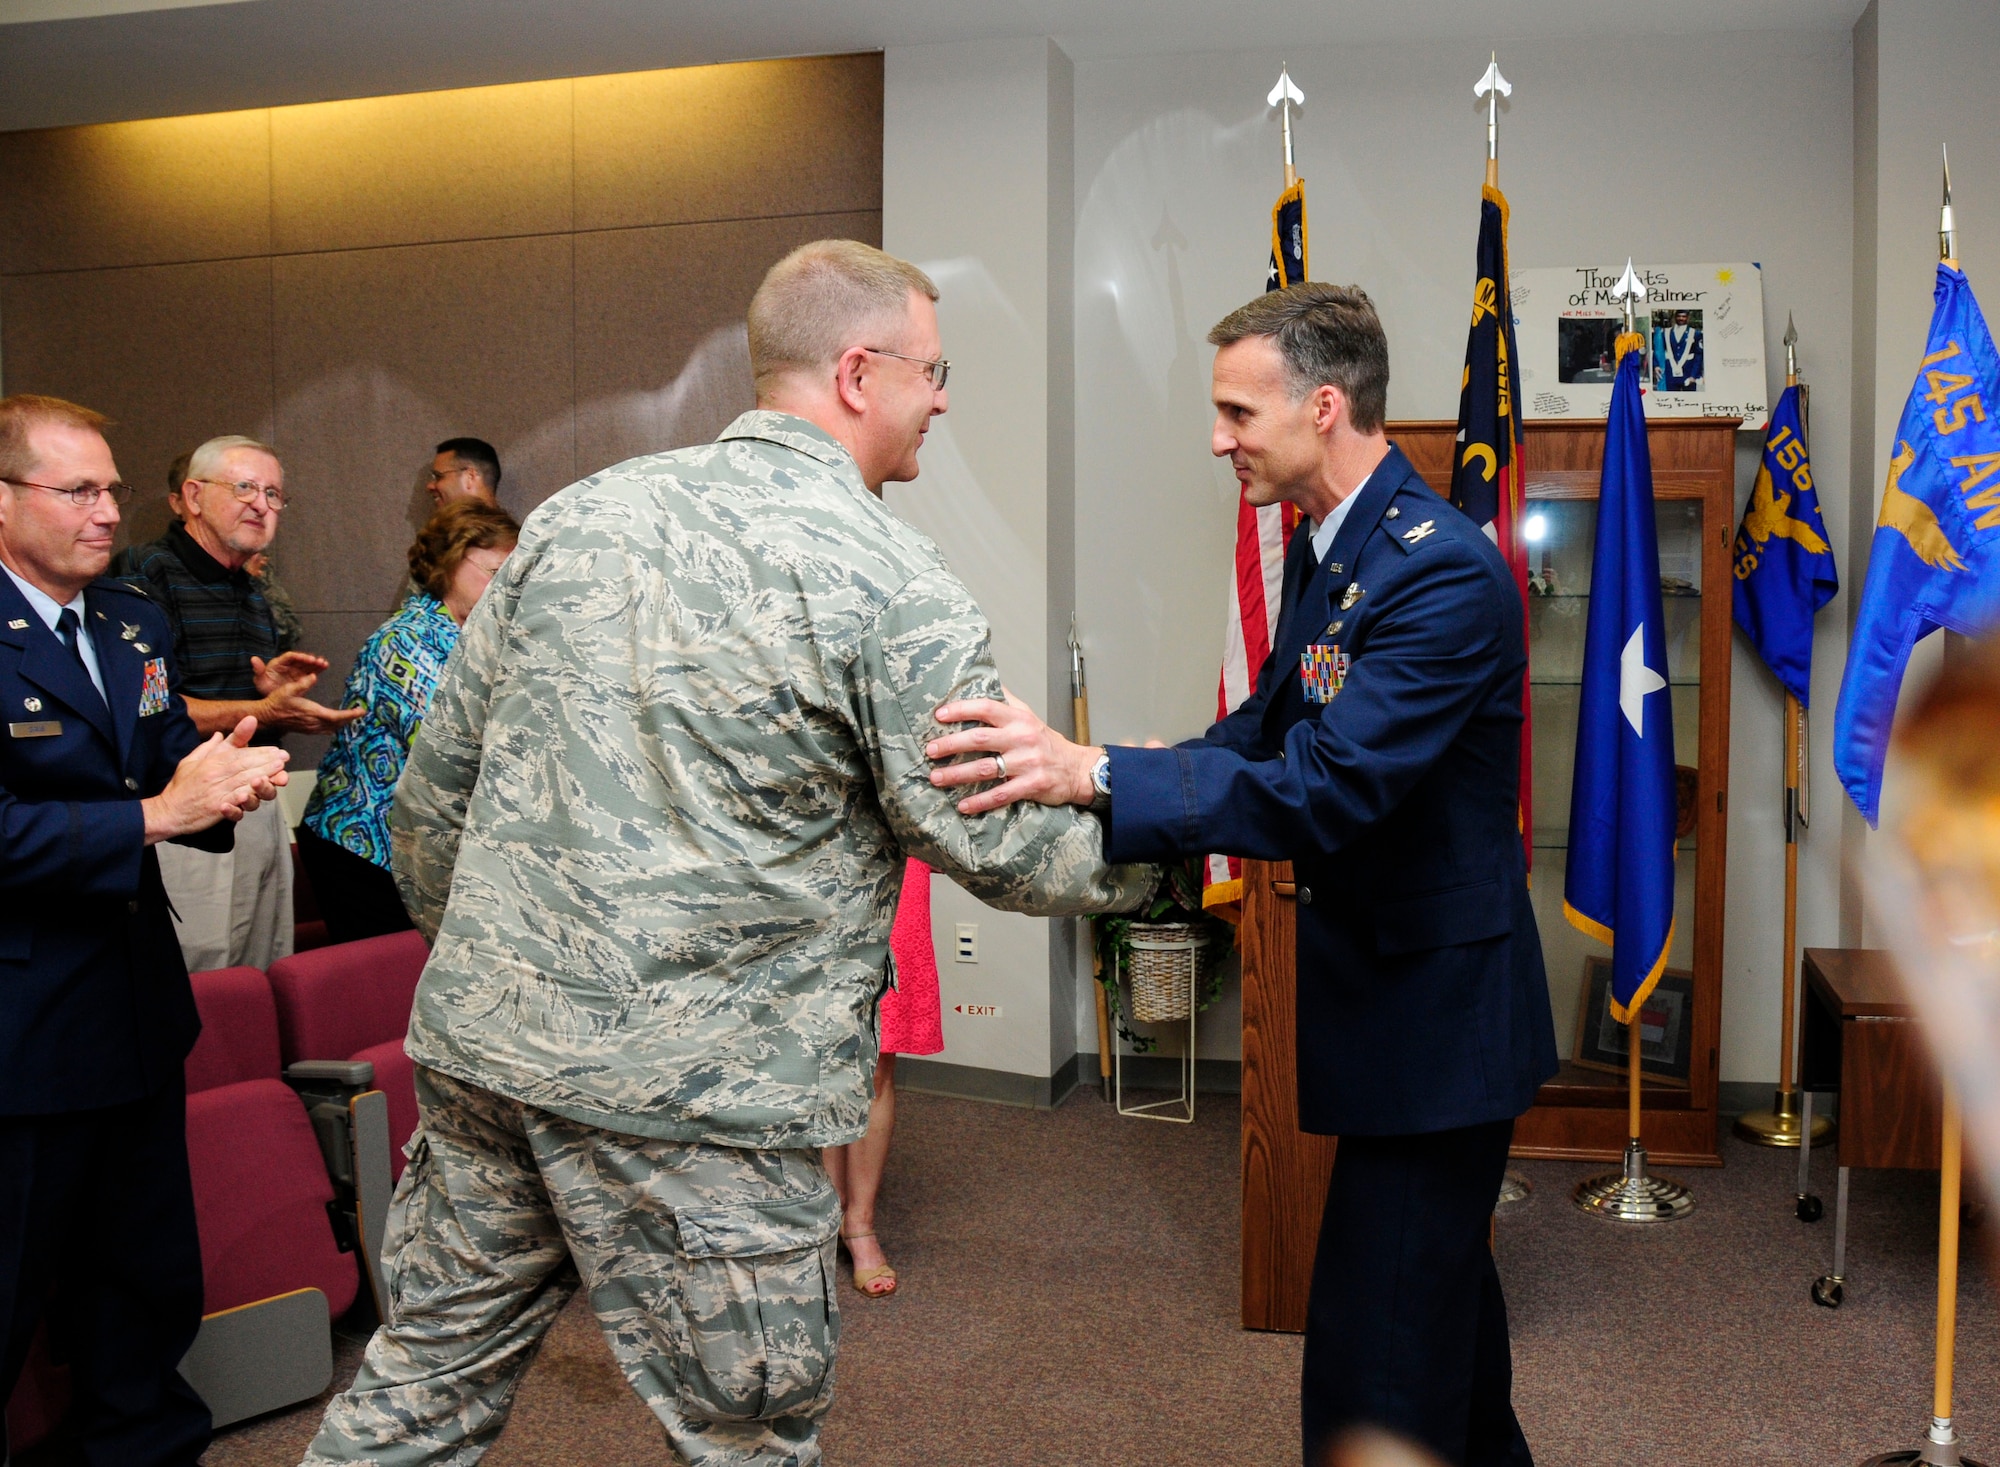 After assuming command of the 145th Operations Group, U.S. Air Force Col. Joseph H. Stepp IV is congratulated by Brig. Gen. Roger E. Williams, Jr., Assistant Adjutant General – Air, during a change of command ceremony held at the North Carolina Air National Guard Base, Charlotte Douglas International Airport; June 6, 2015. (U.S. Air National Guard photo by Master Sgt. Patricia F. Moran, 145th Public Affairs/Released)